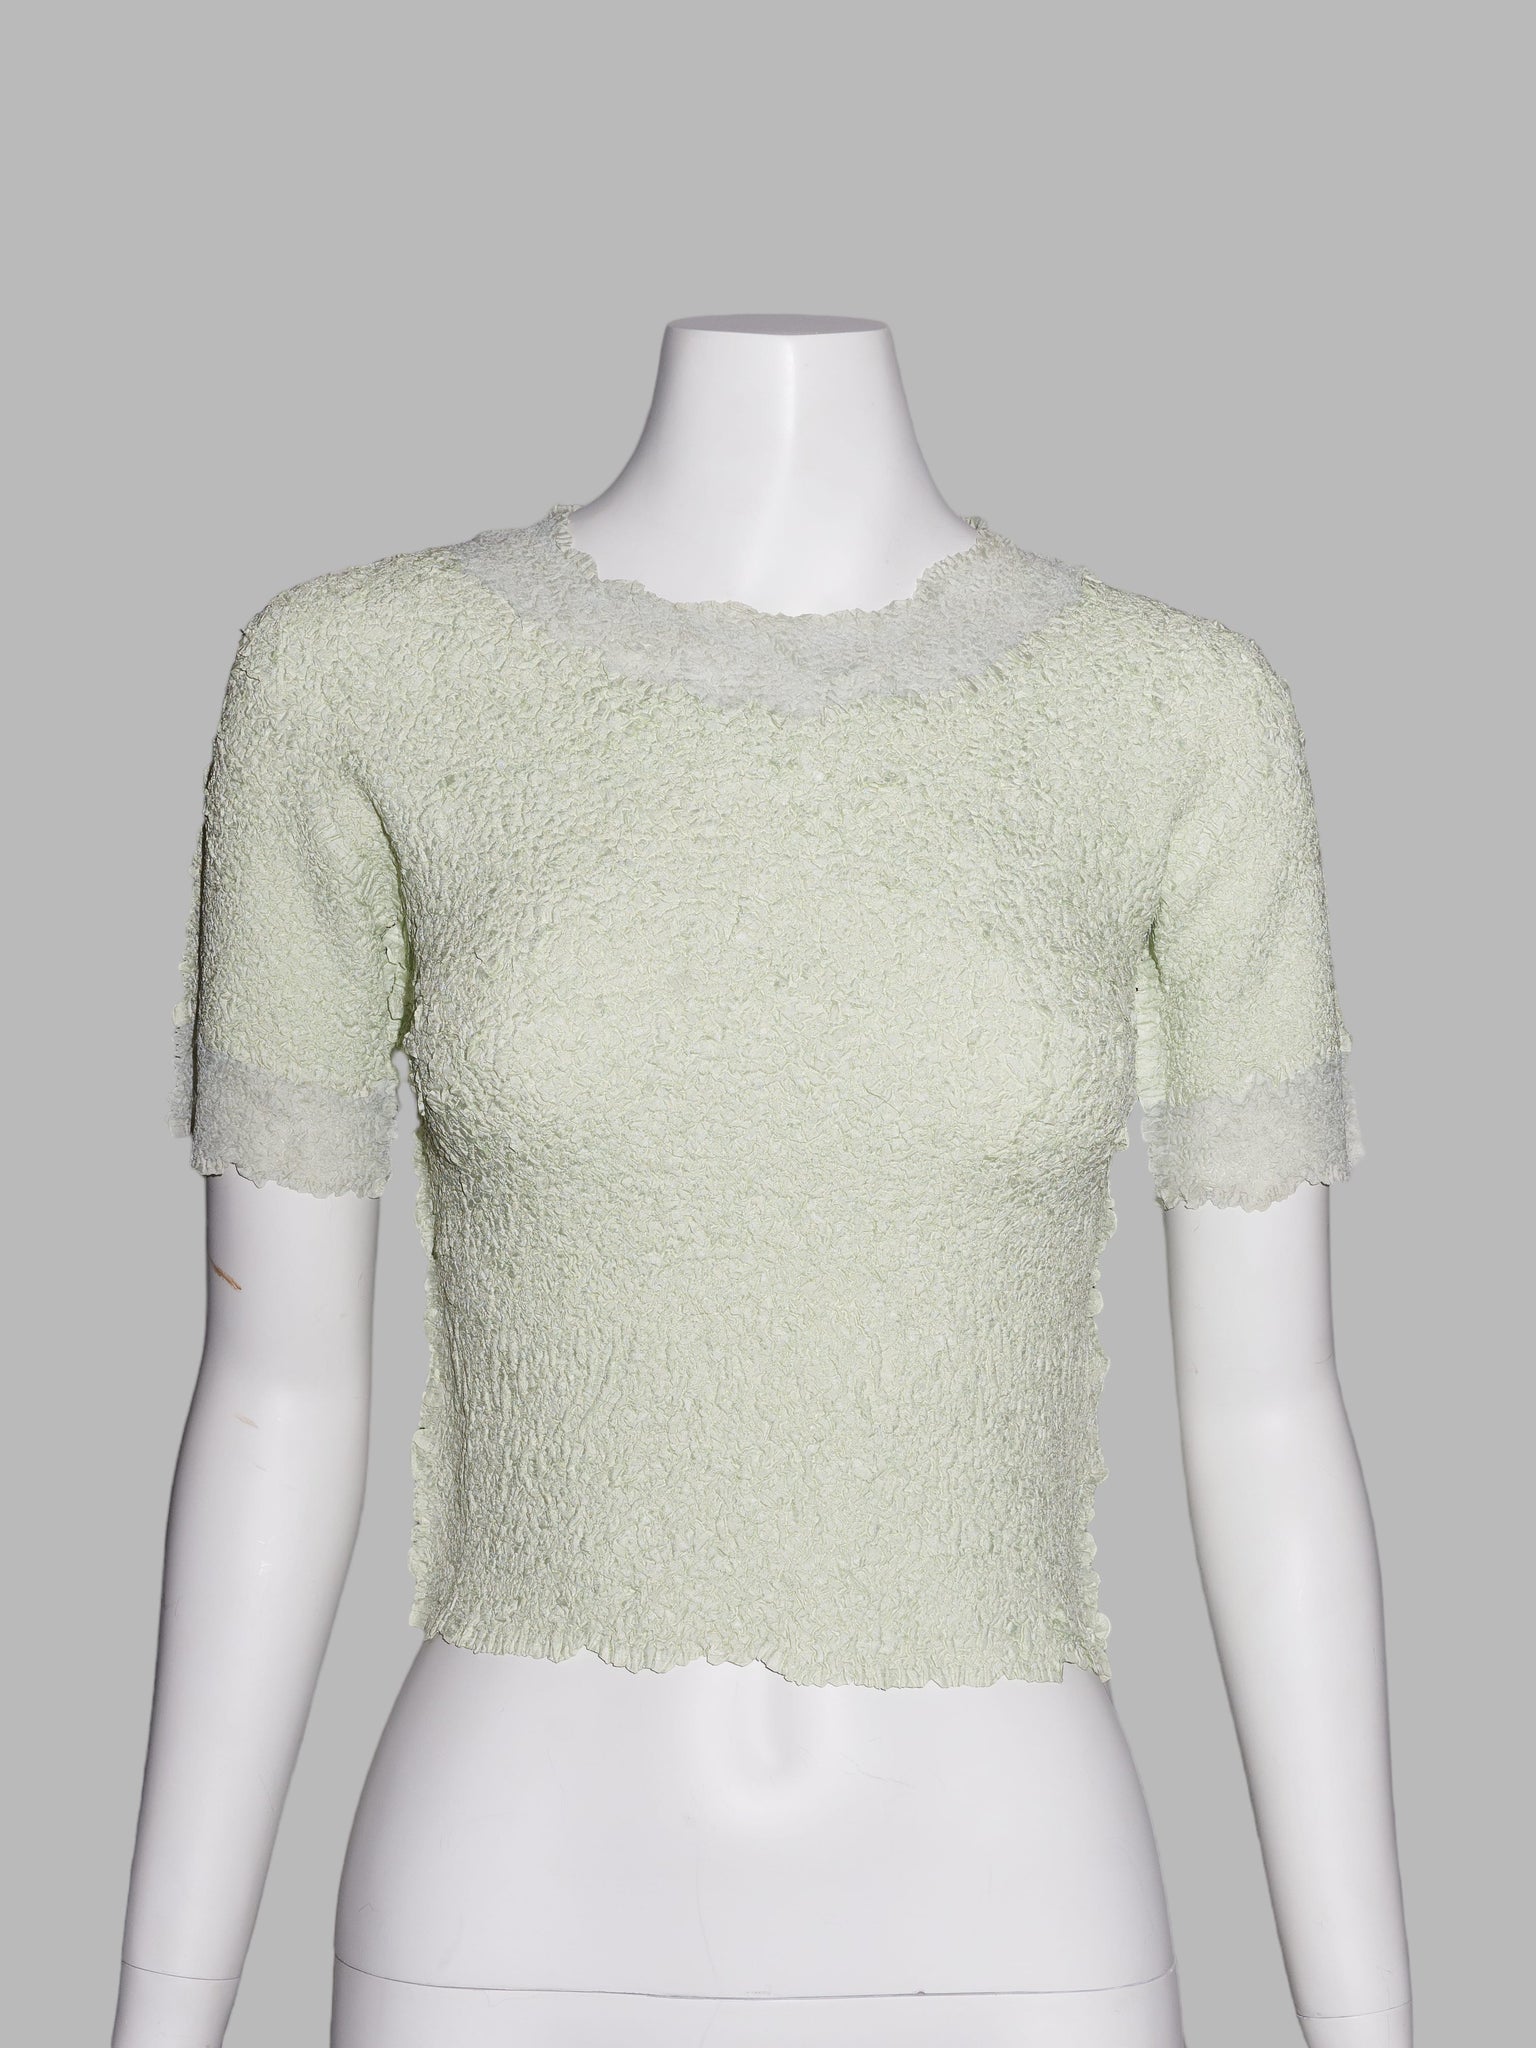 Wrinqle Inoue Pleats pale green wrinkled polyester t-shirt with sheer edges